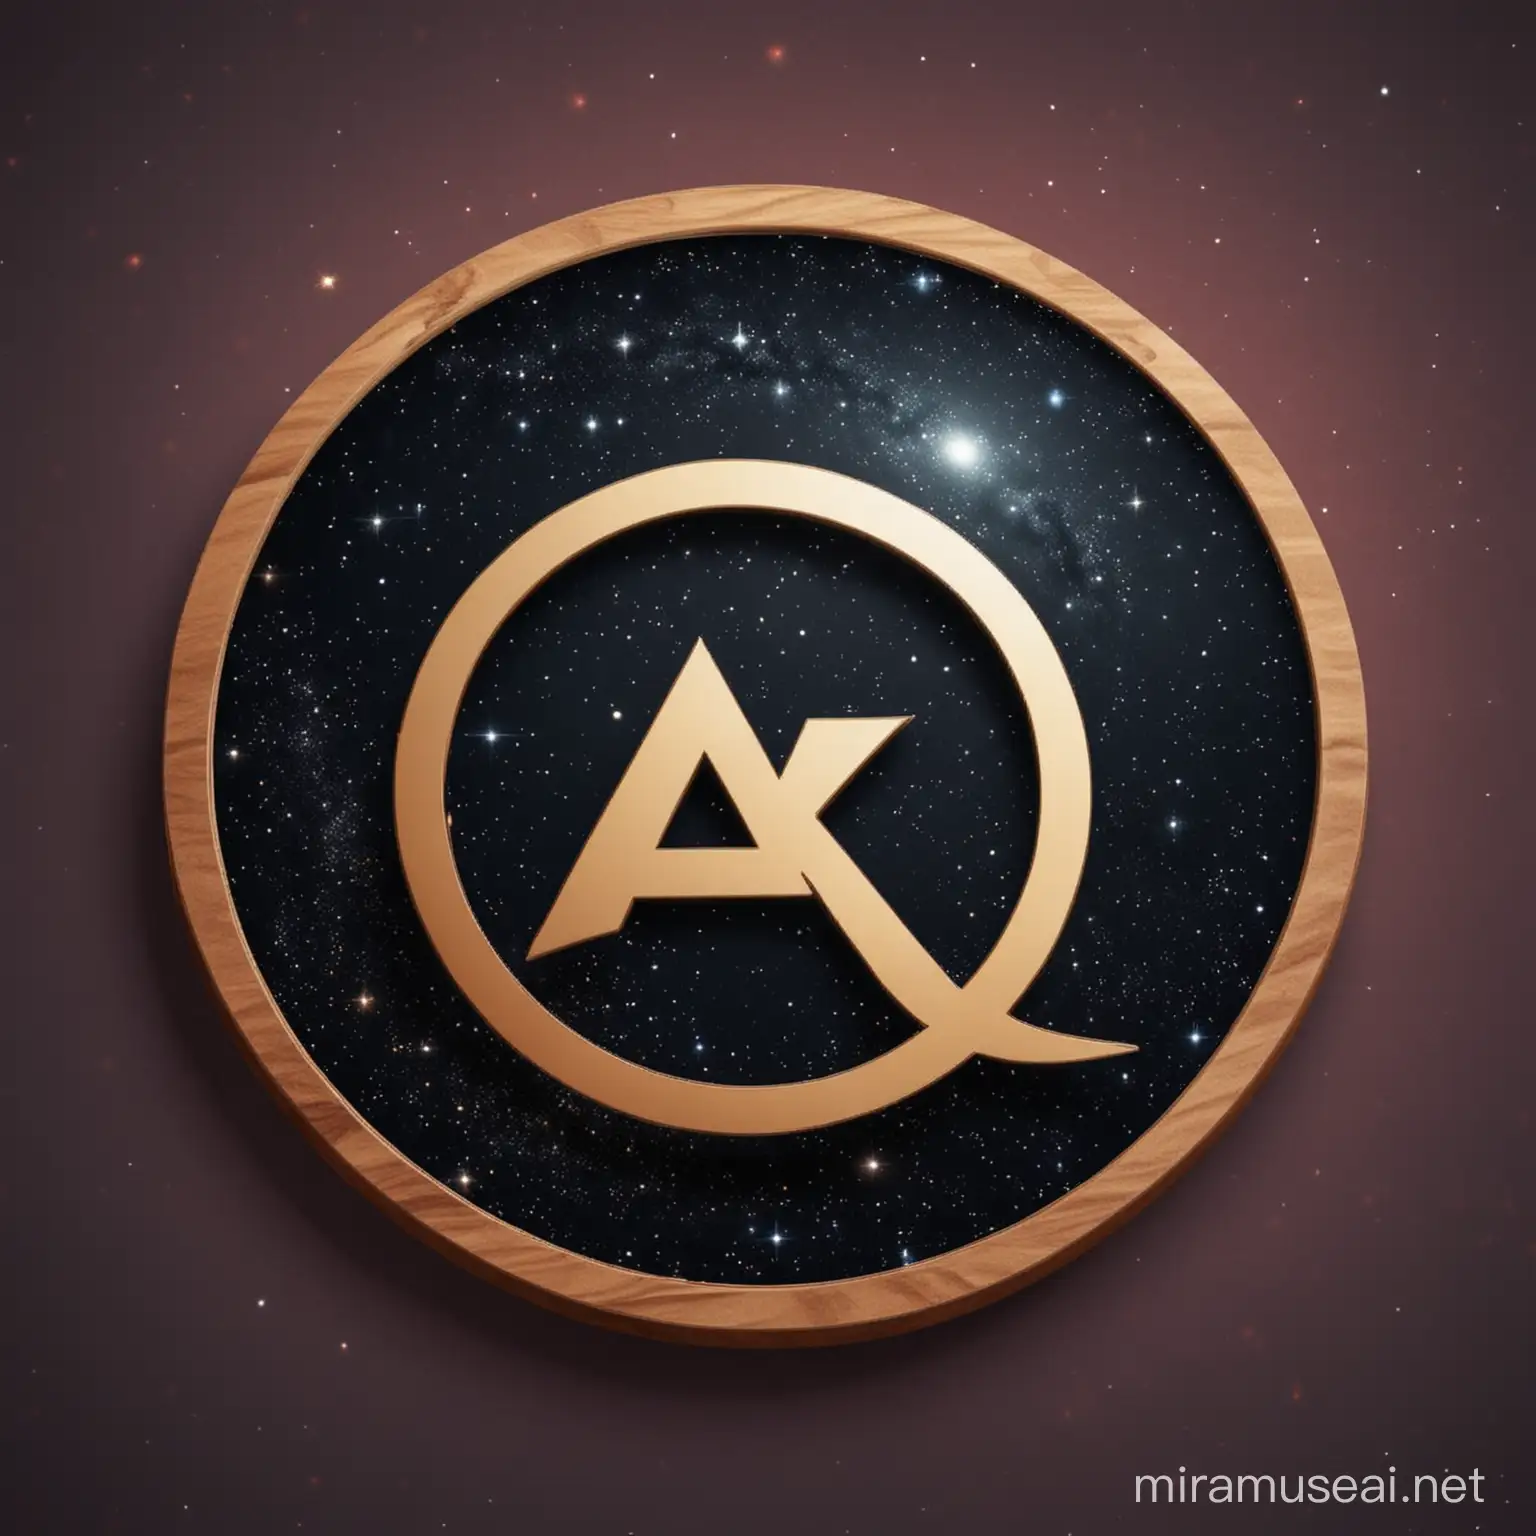 create a logo - AK (Describtion - Ak latter in the round shape with the space background)